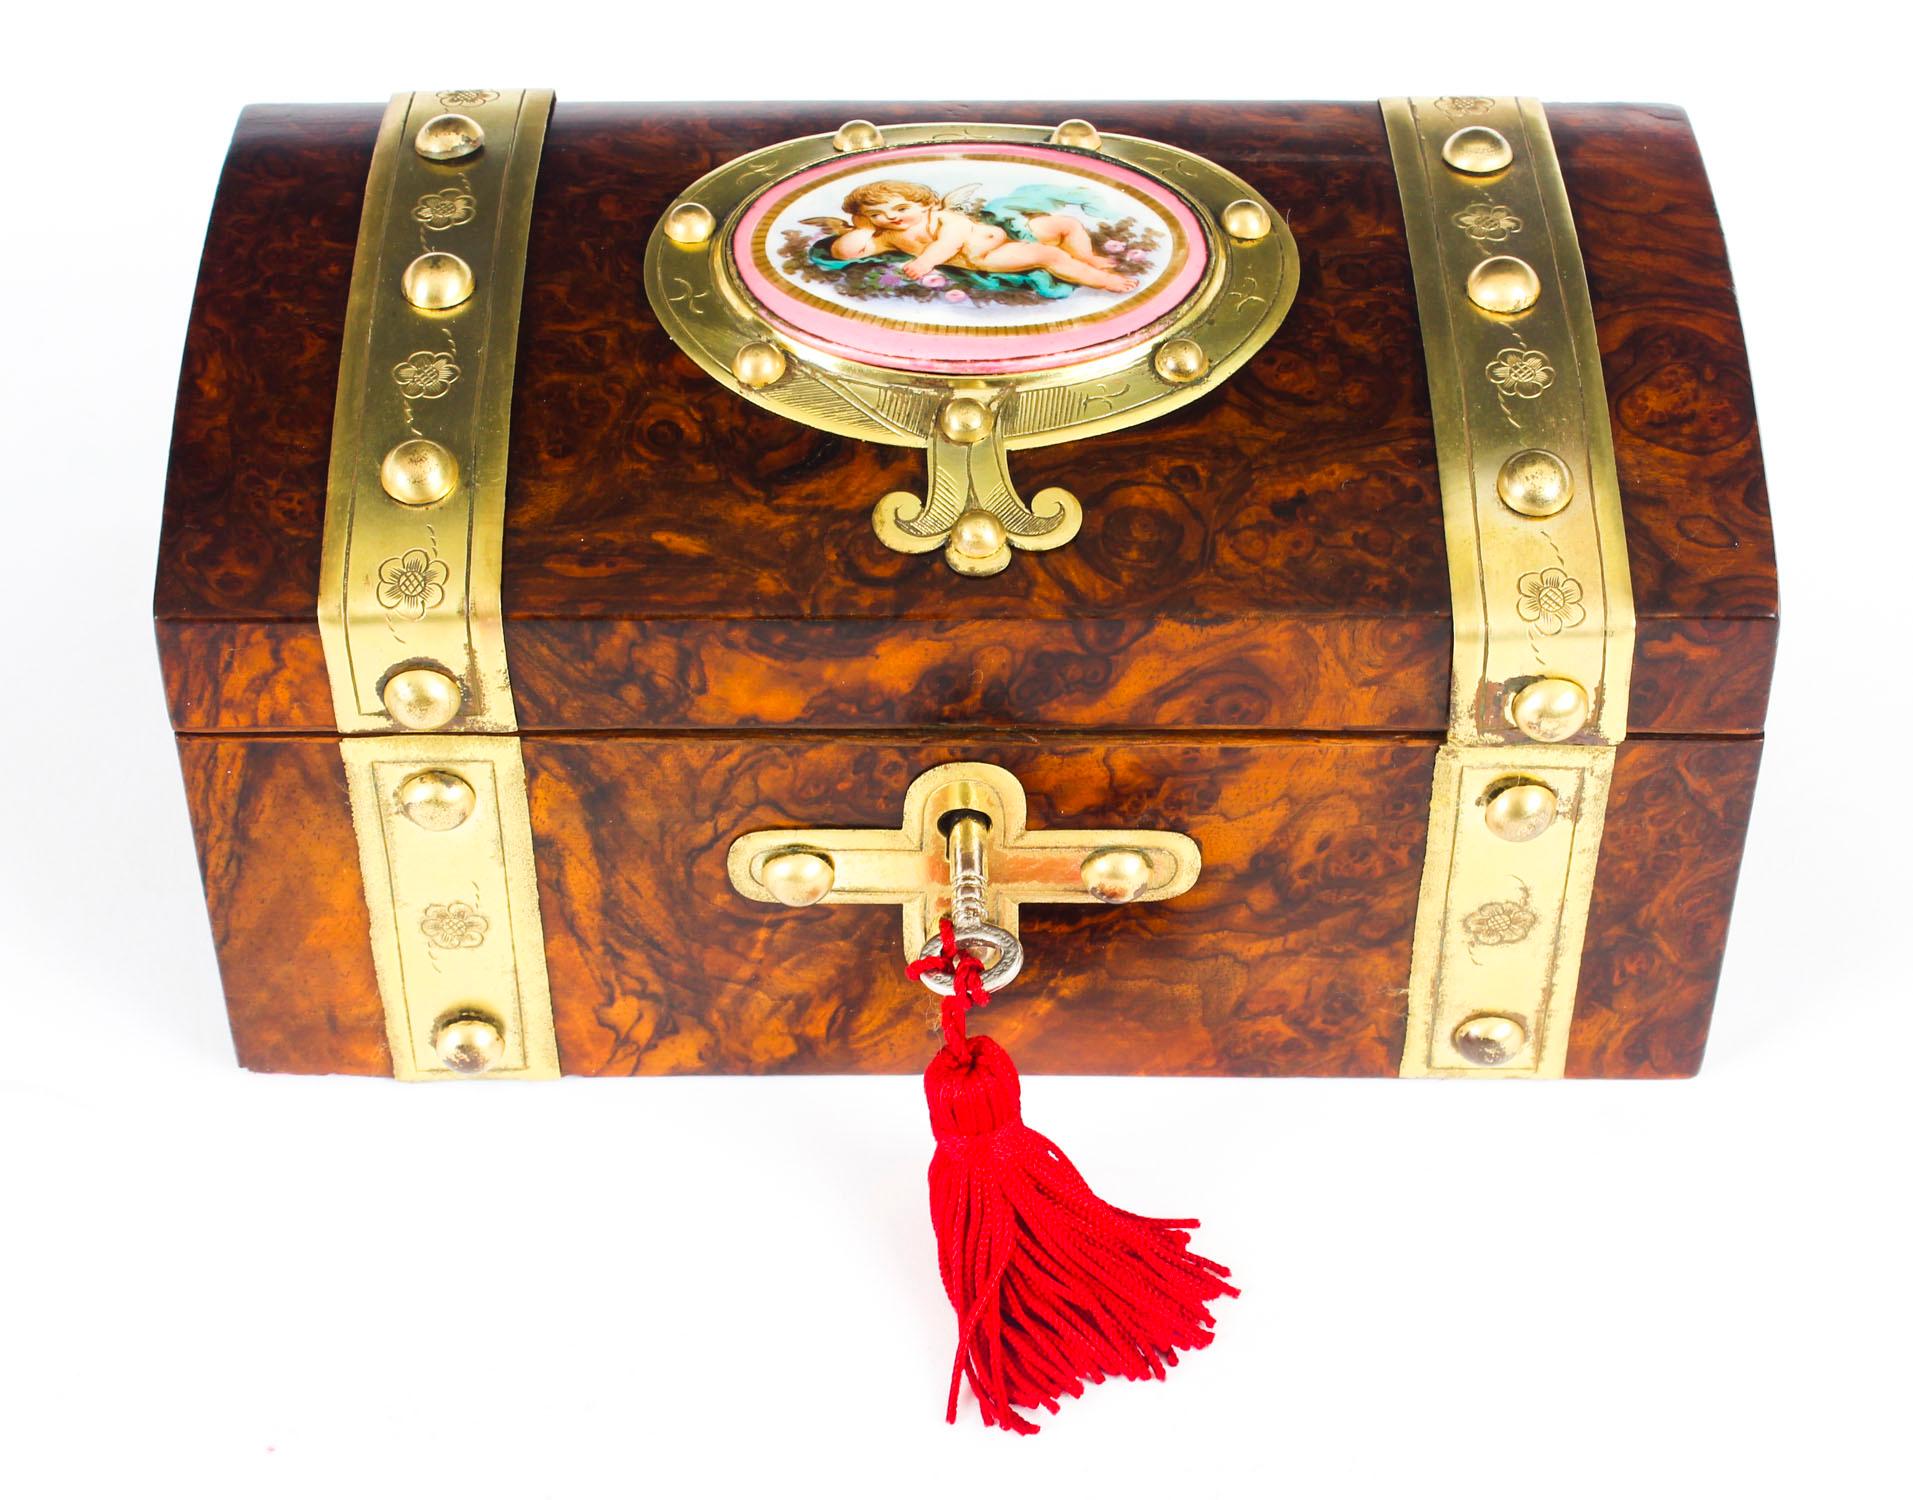 A 19th century porcelain and gilt brass mounted burr walnut box, hinged cover applied with an oval plaque, decorated with Cupid reclining, 21cm wide, circa 1870

This is a fine antique French 19th century porcelain and ormolu mounted burr walnut